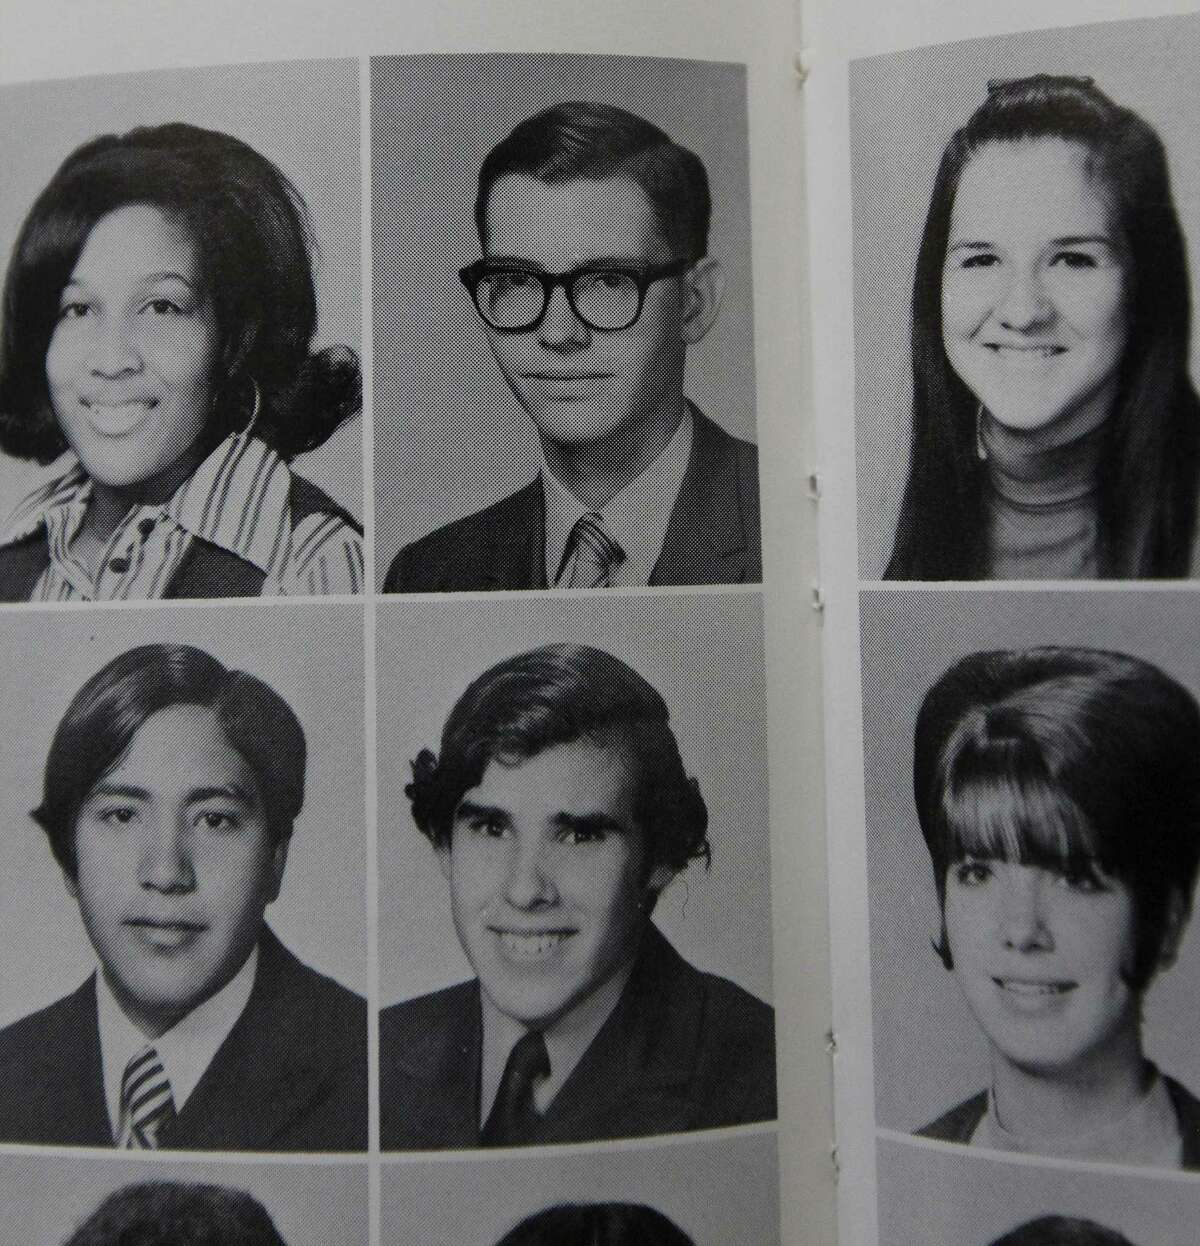 Photo of William E. Moerner (top center) as a 12th grader as seen in the 1971 yearbook from Jefferson High School. Moerner was award the 2014 Nobel Prize in chemistry for his work involving single-molecule microscopy. Moerner attended Longfellow Junior High and Jefferson High School. He graduated from Jefferson in 1971.